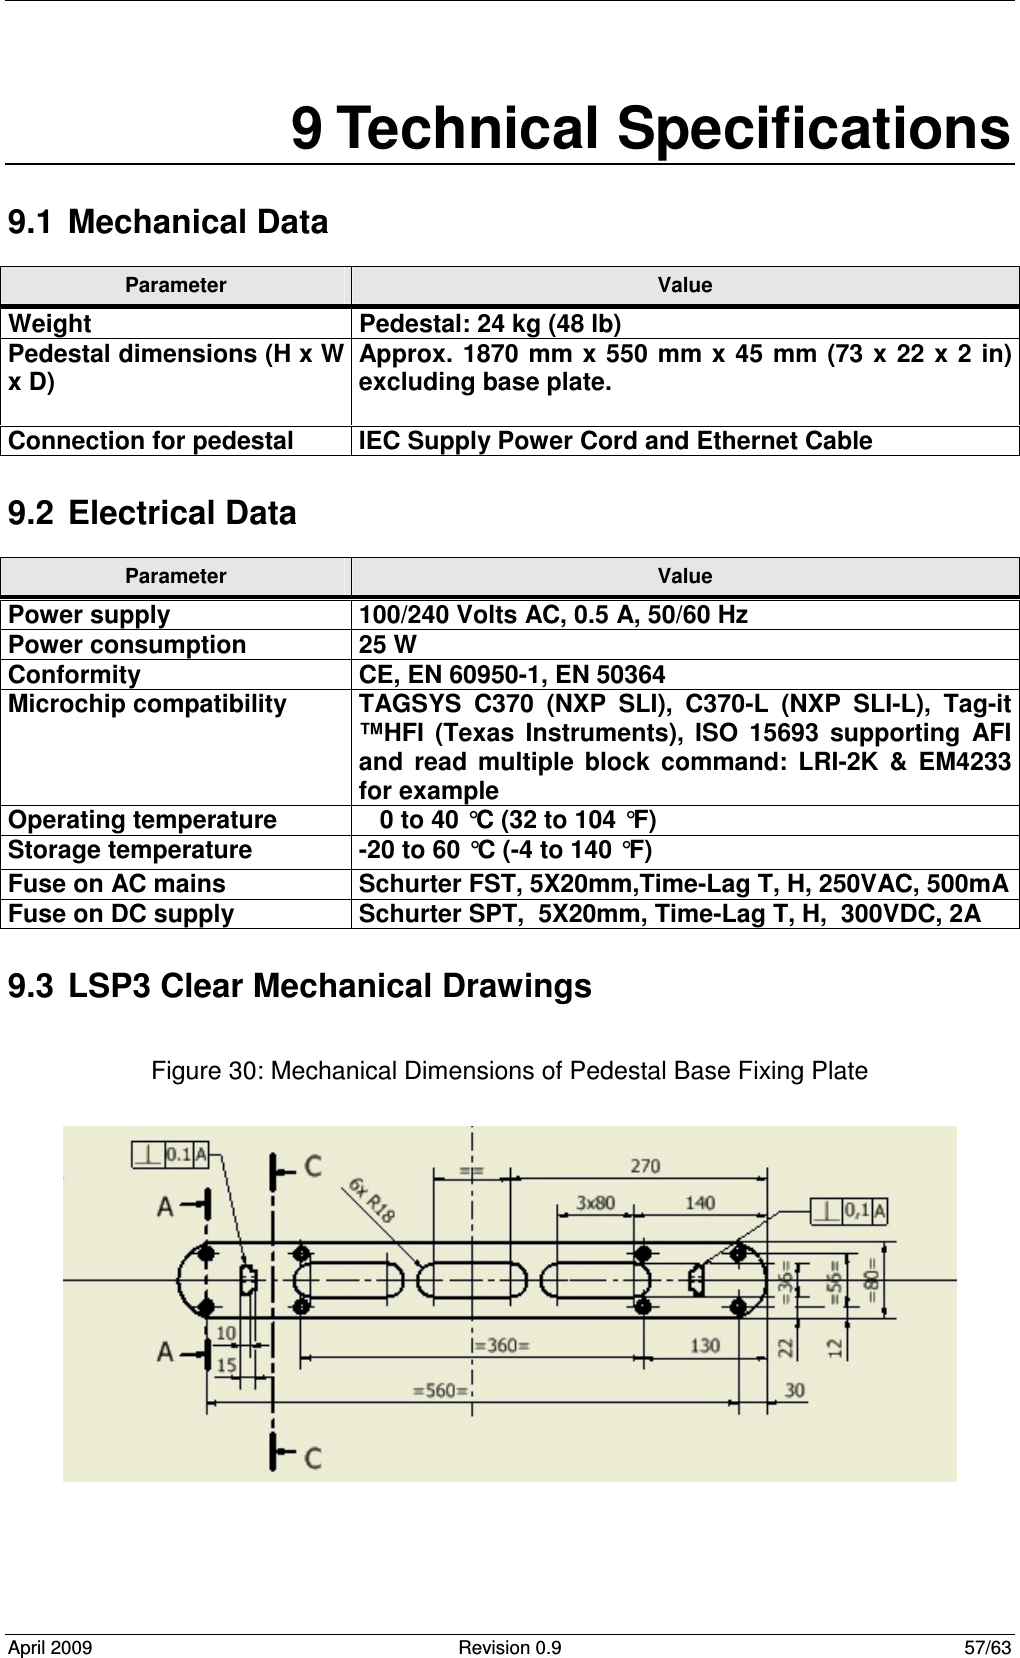  April 2009  Revision 0.9  57/63 9 Technical Specifications 9.1  Mechanical Data Parameter  Value  9.2  Electrical Data Parameter  Value 9.3  LSP3 Clear Mechanical Drawings  Figure 30: Mechanical Dimensions of Pedestal Base Fixing Plate    Weight  Pedestal: 24 kg (48 lb) Pedestal dimensions (H x W x D)  Approx.  1870  mm x  550 mm x 45 mm (73  x 22 x 2 in) excluding base plate.  Connection for pedestal  IEC Supply Power Cord and Ethernet Cable Power supply   100/240 Volts AC, 0.5 A, 50/60 Hz Power consumption  25 W Conformity  CE, EN 60950-1, EN 50364 Microchip compatibility  TAGSYS  C370  (NXP  SLI),  C370-L  (NXP  SLI-L),  Tag-it ™HFI  (Texas  Instruments),  ISO  15693  supporting  AFI and  read  multiple  block  command:  LRI-2K  &amp;  EM4233 for example Operating temperature     0 to 40 °C (32 to 104 °F) Storage temperature  -20 to 60 °C (-4 to 140 °F) Fuse on AC mains  Schurter FST, 5X20mm,Time-Lag T, H, 250VAC, 500mA Fuse on DC supply   Schurter SPT,  5X20mm, Time-Lag T, H,  300VDC, 2A 